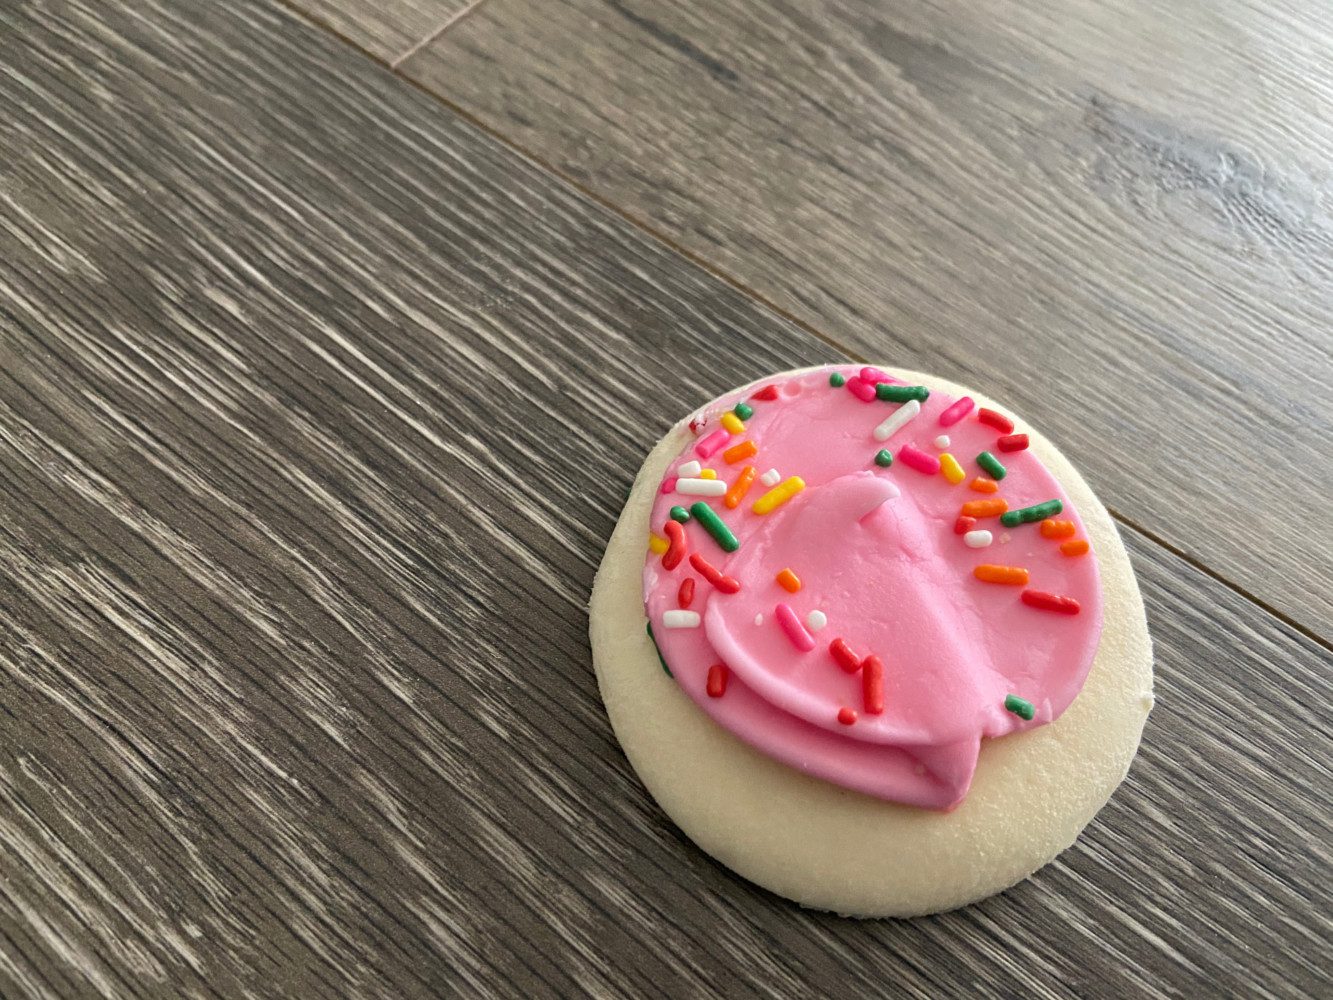 This cookie that was just dropped on the floor may look okay to eat but the floor may be teeming with microbes that could make you sick.